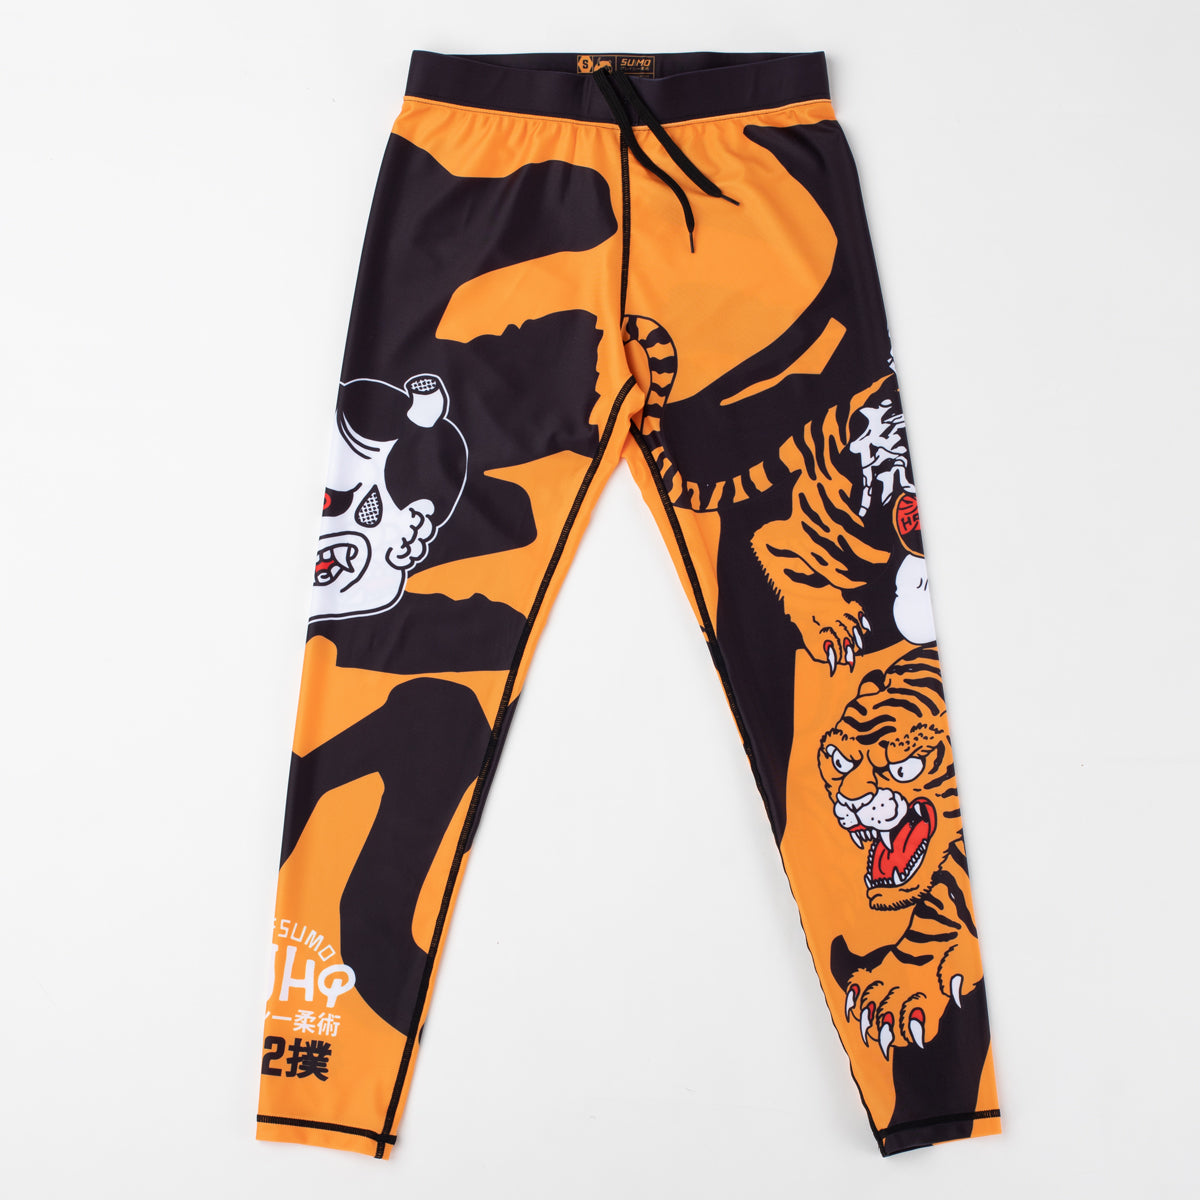 Half Sumo X HQ "Year of the Tiger" Spats